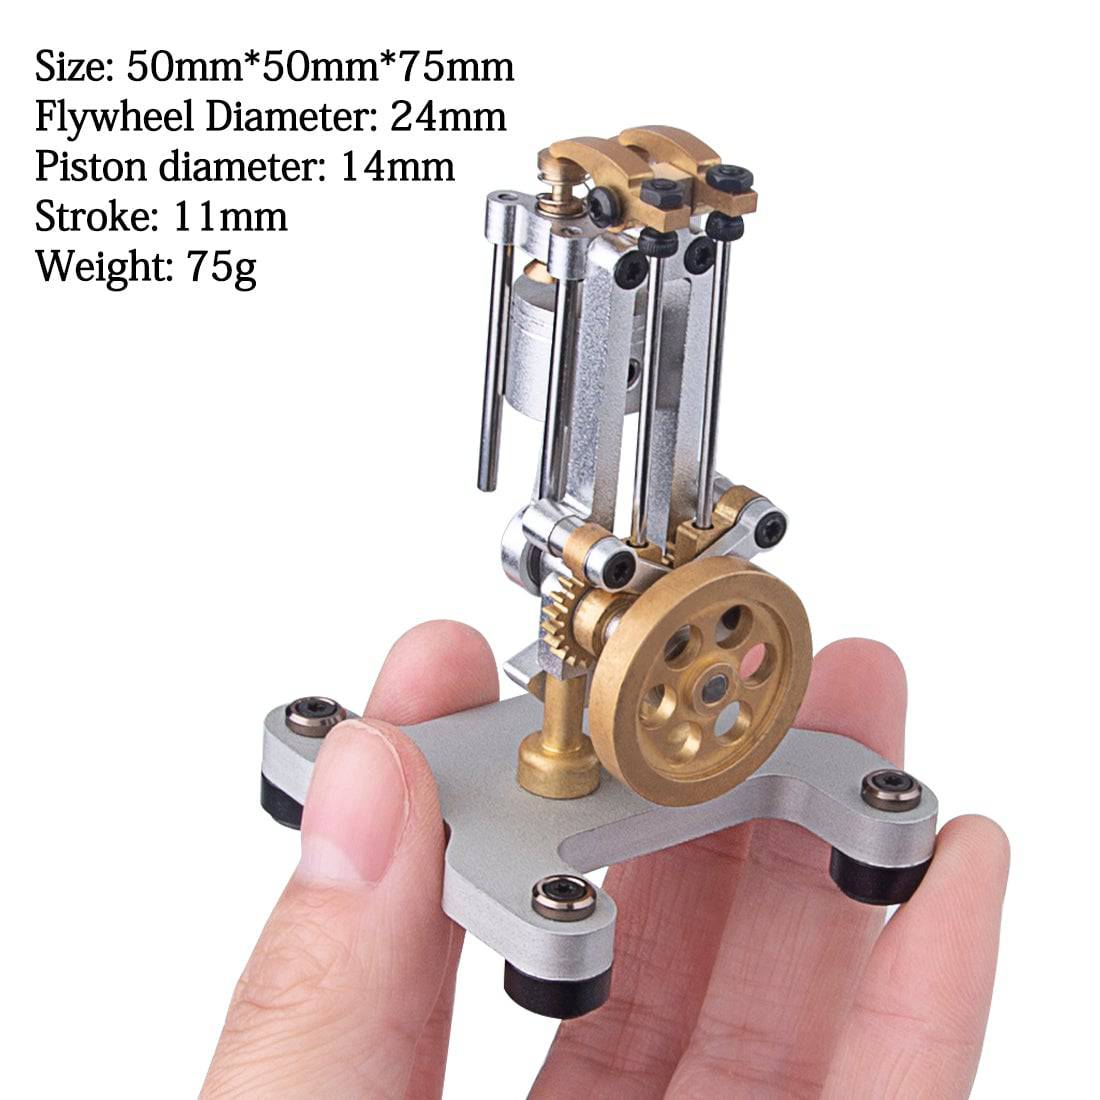 Didactic Four Stroke-cycle Engine Demonstrator Finger Engine - stirlingkit